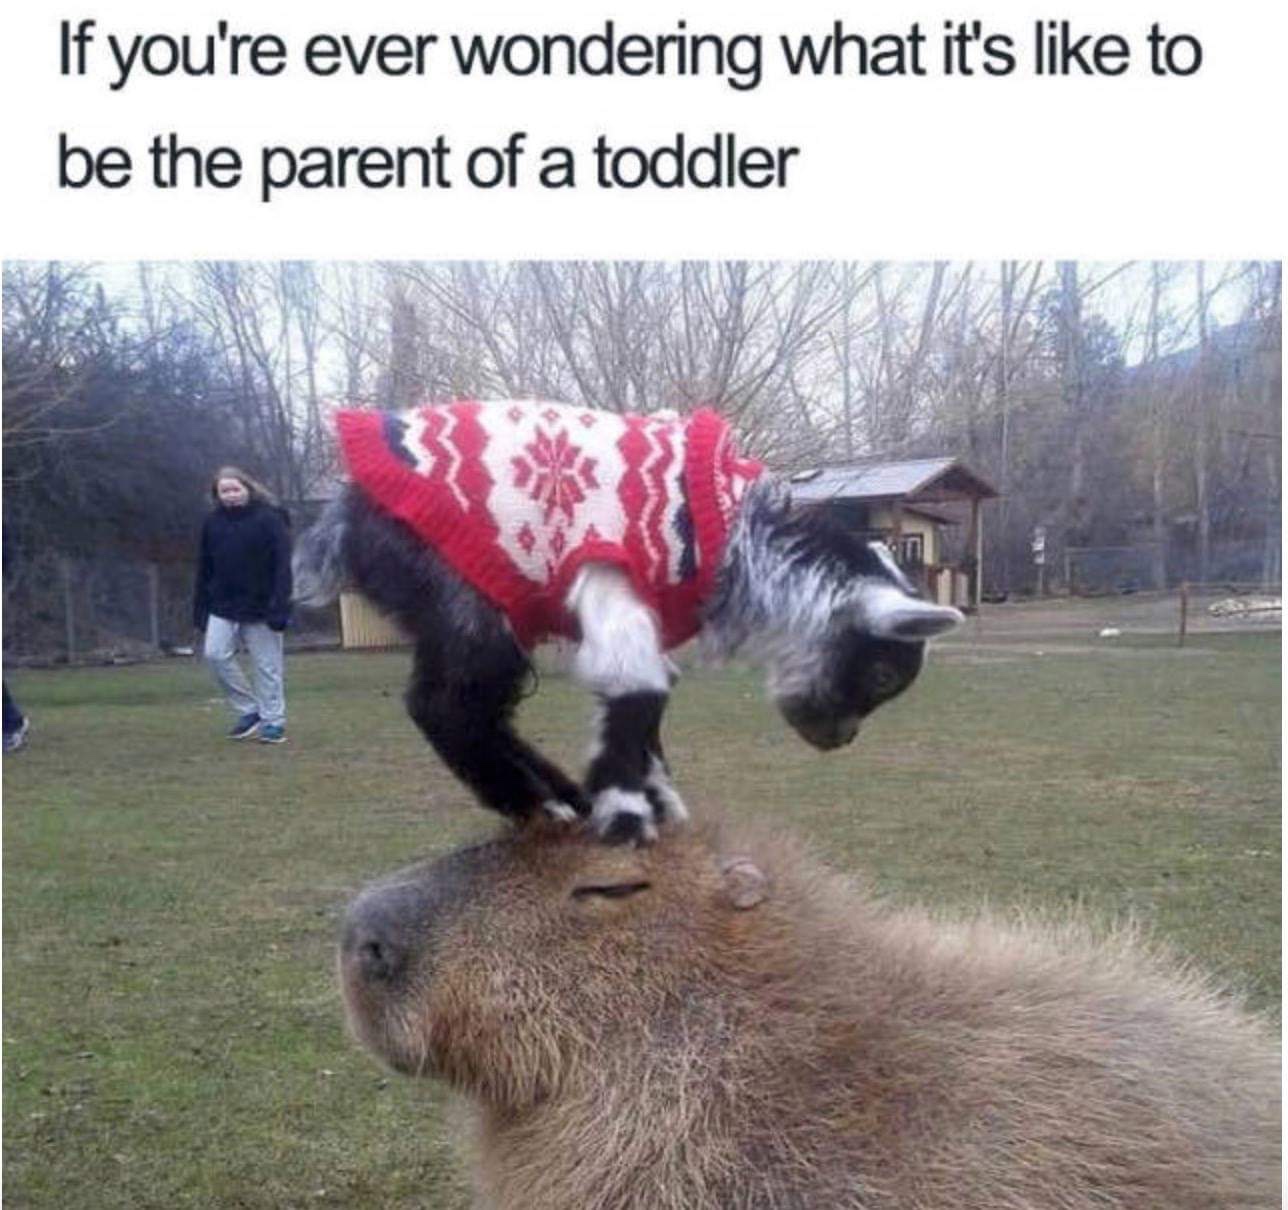 capybara animal friends - If you're ever wondering what it's to be the parent of a toddler